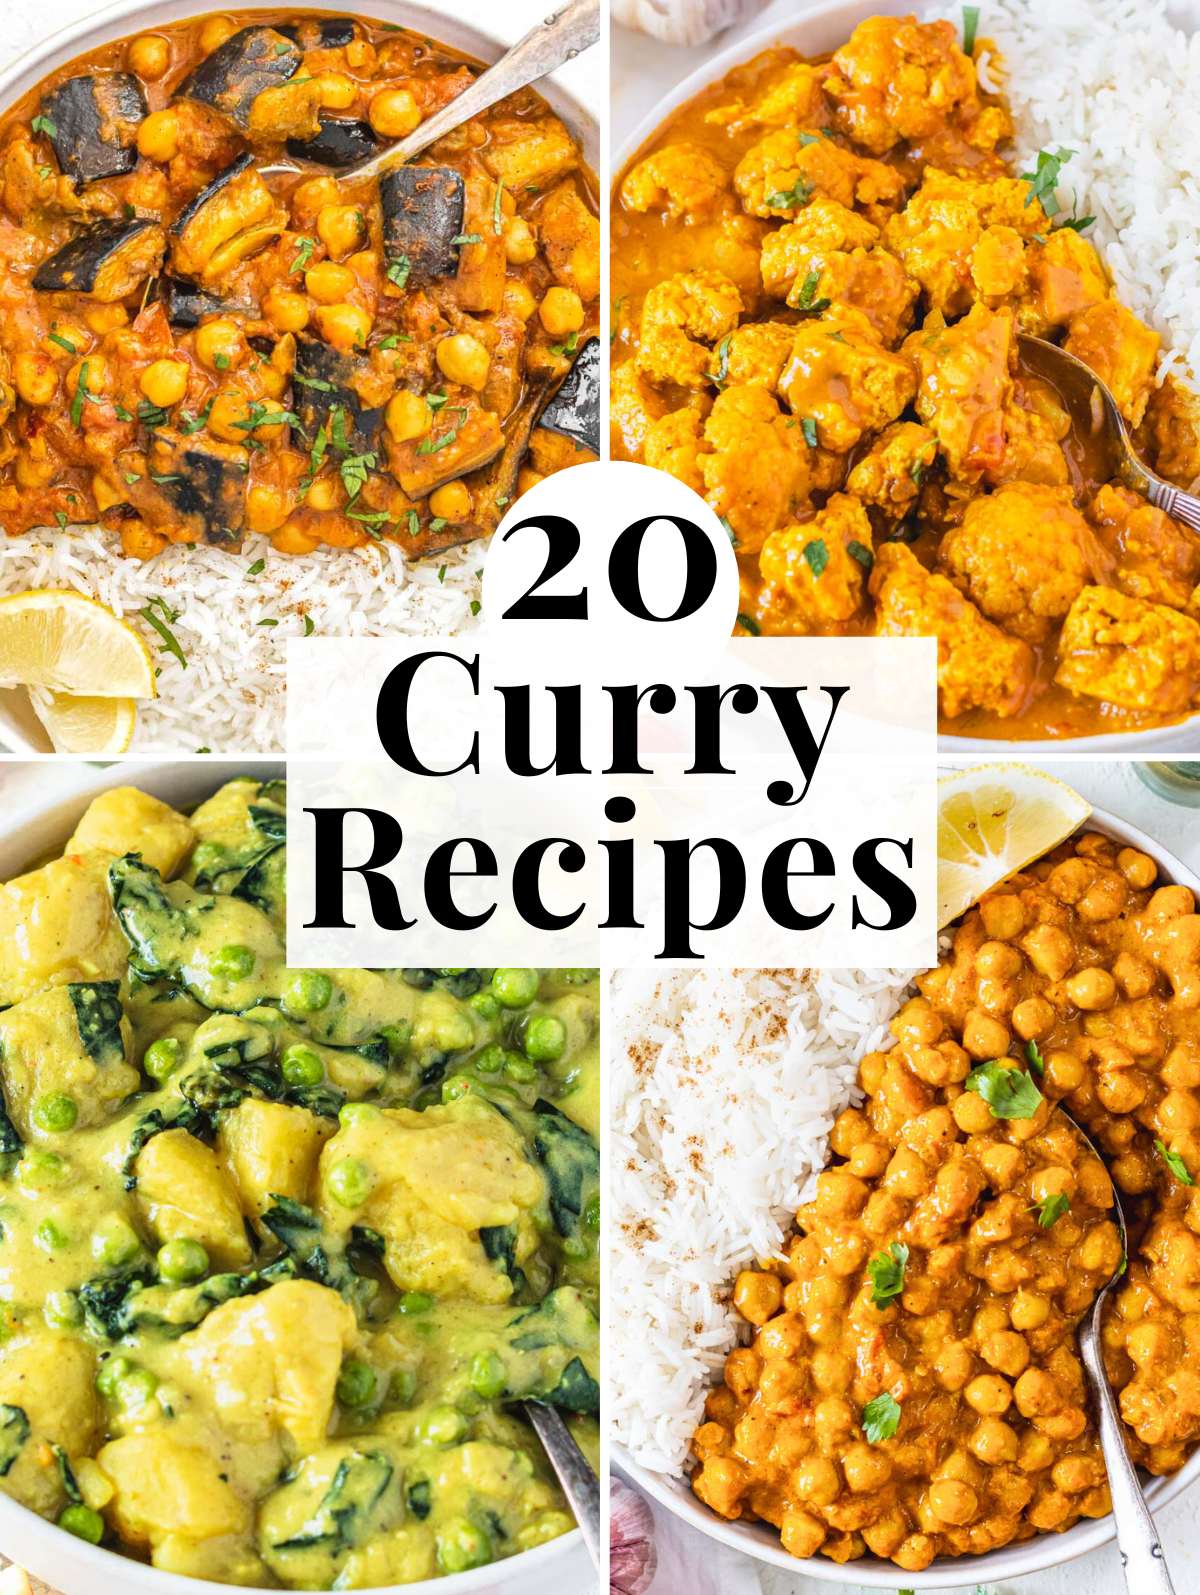 Curry recipes for dinner